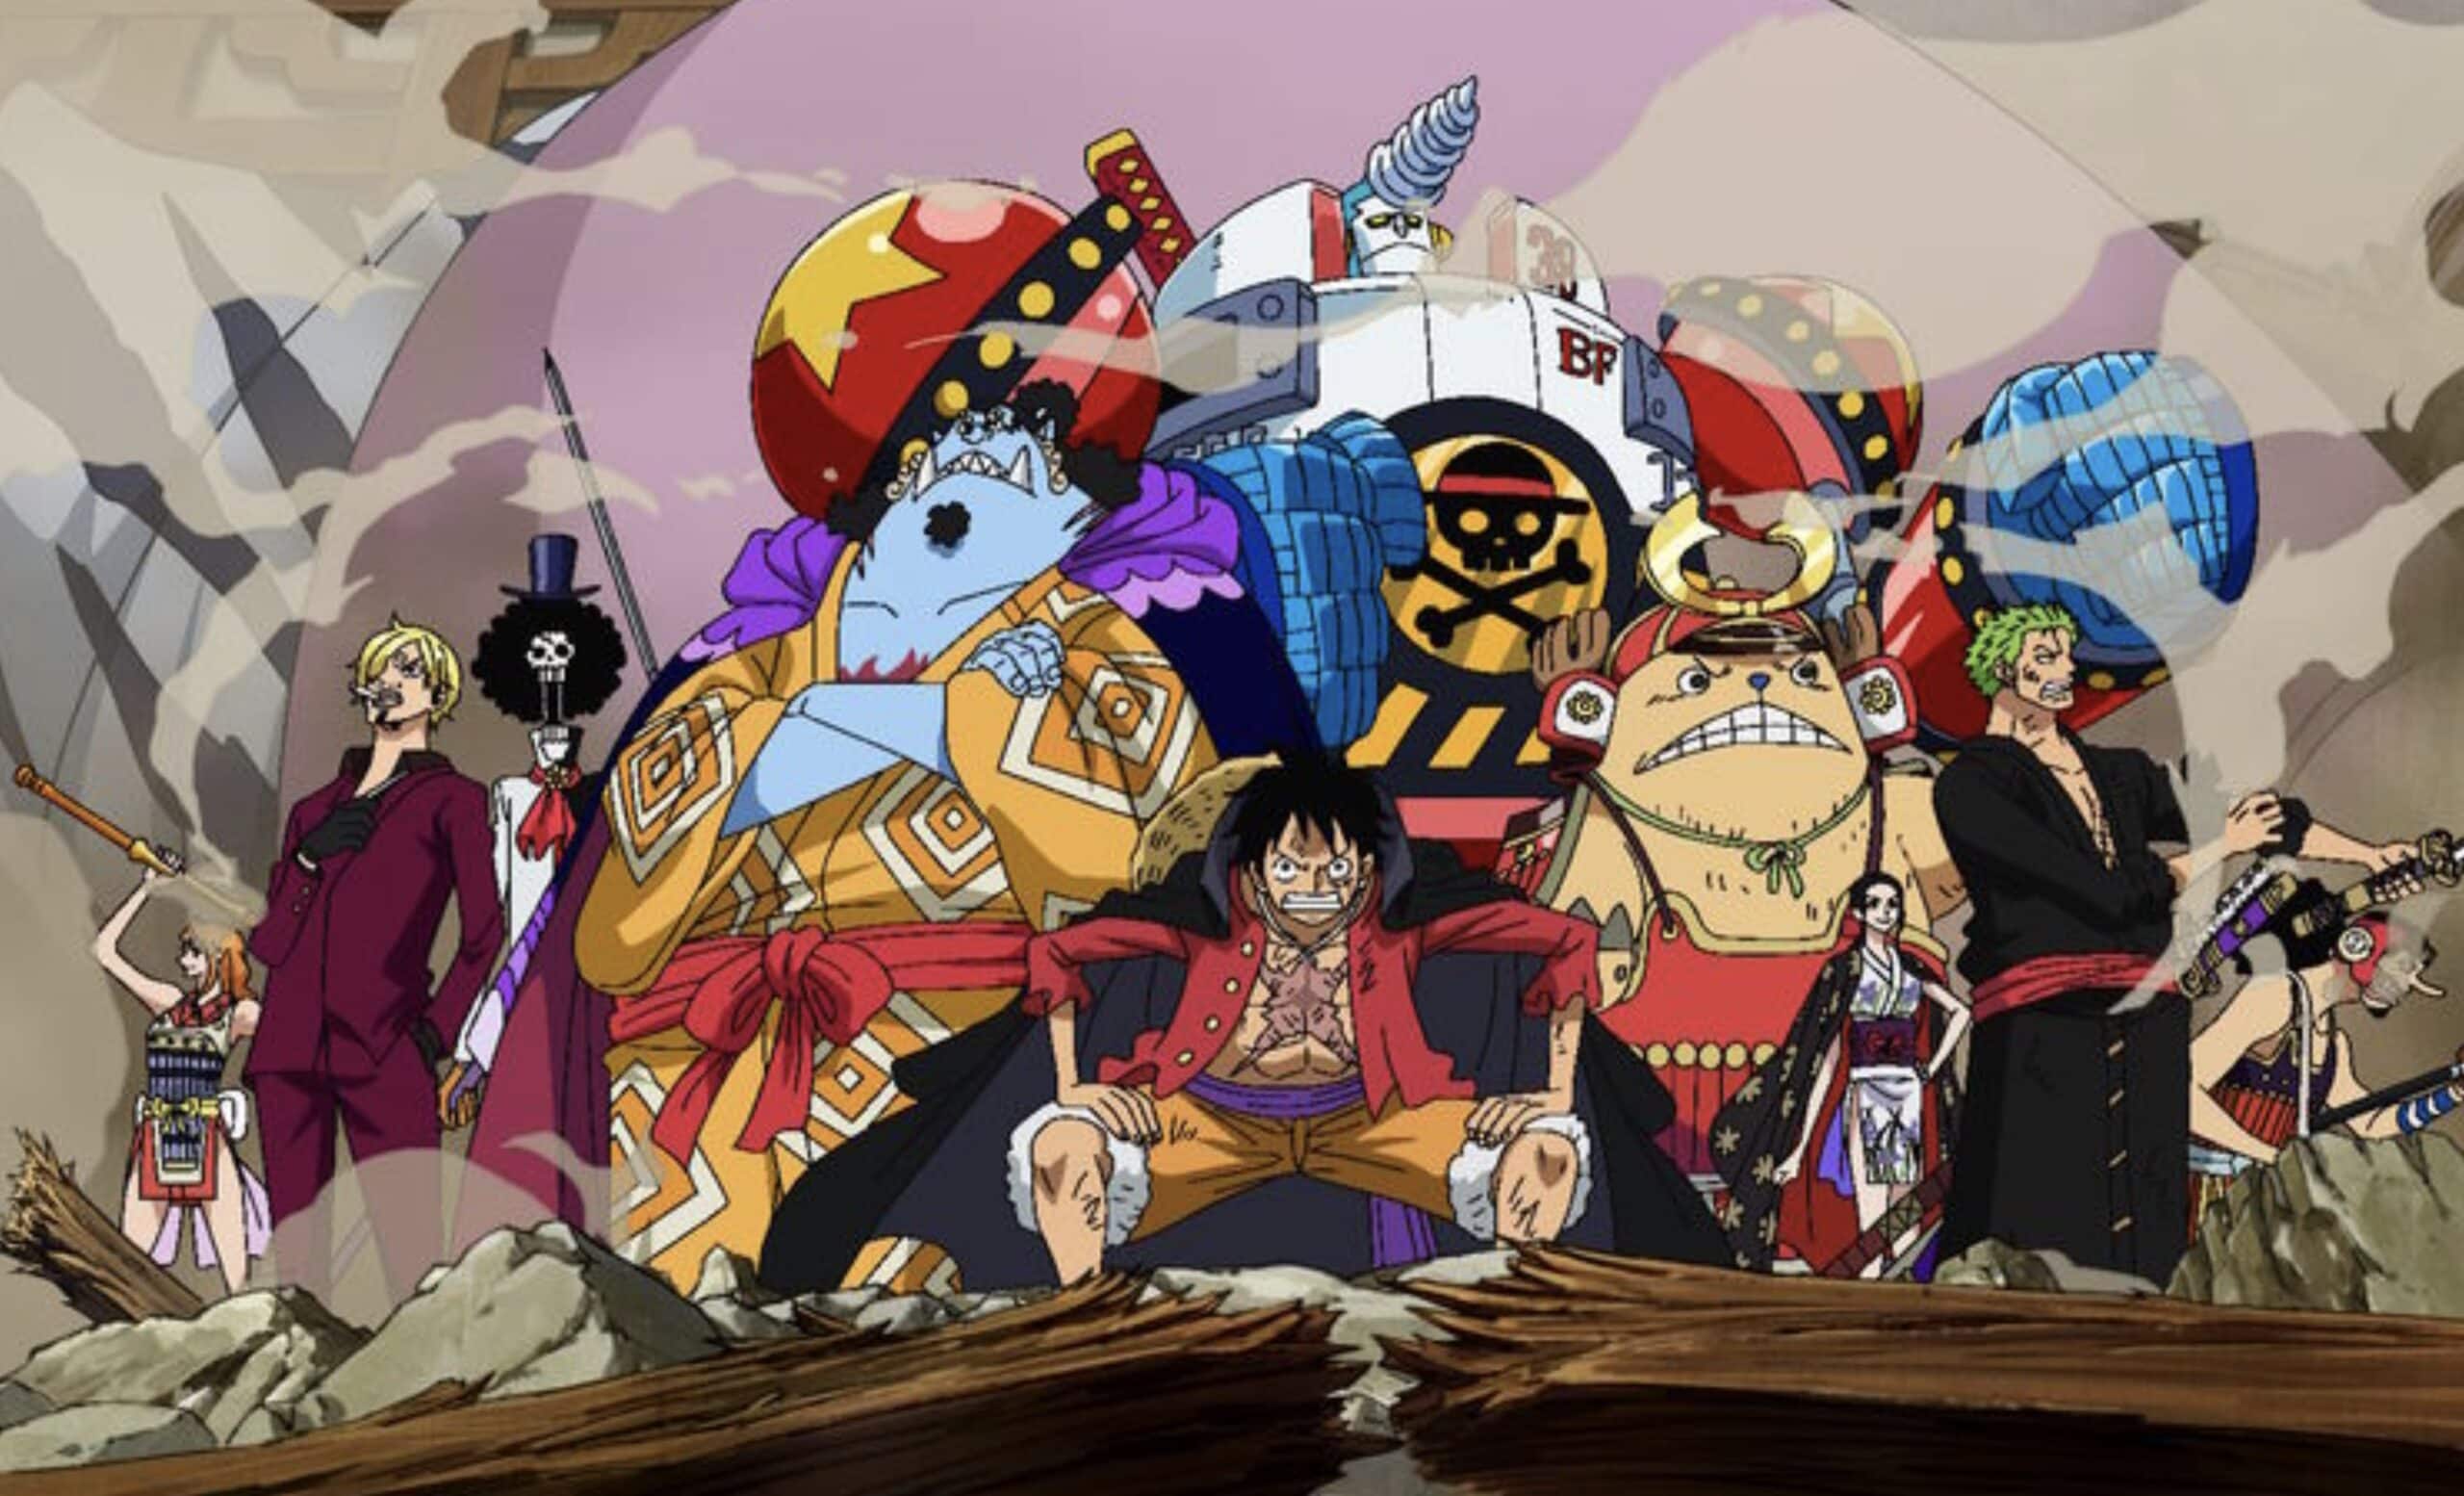 Oda Sensei Shares Top Picks in One Piece Characters